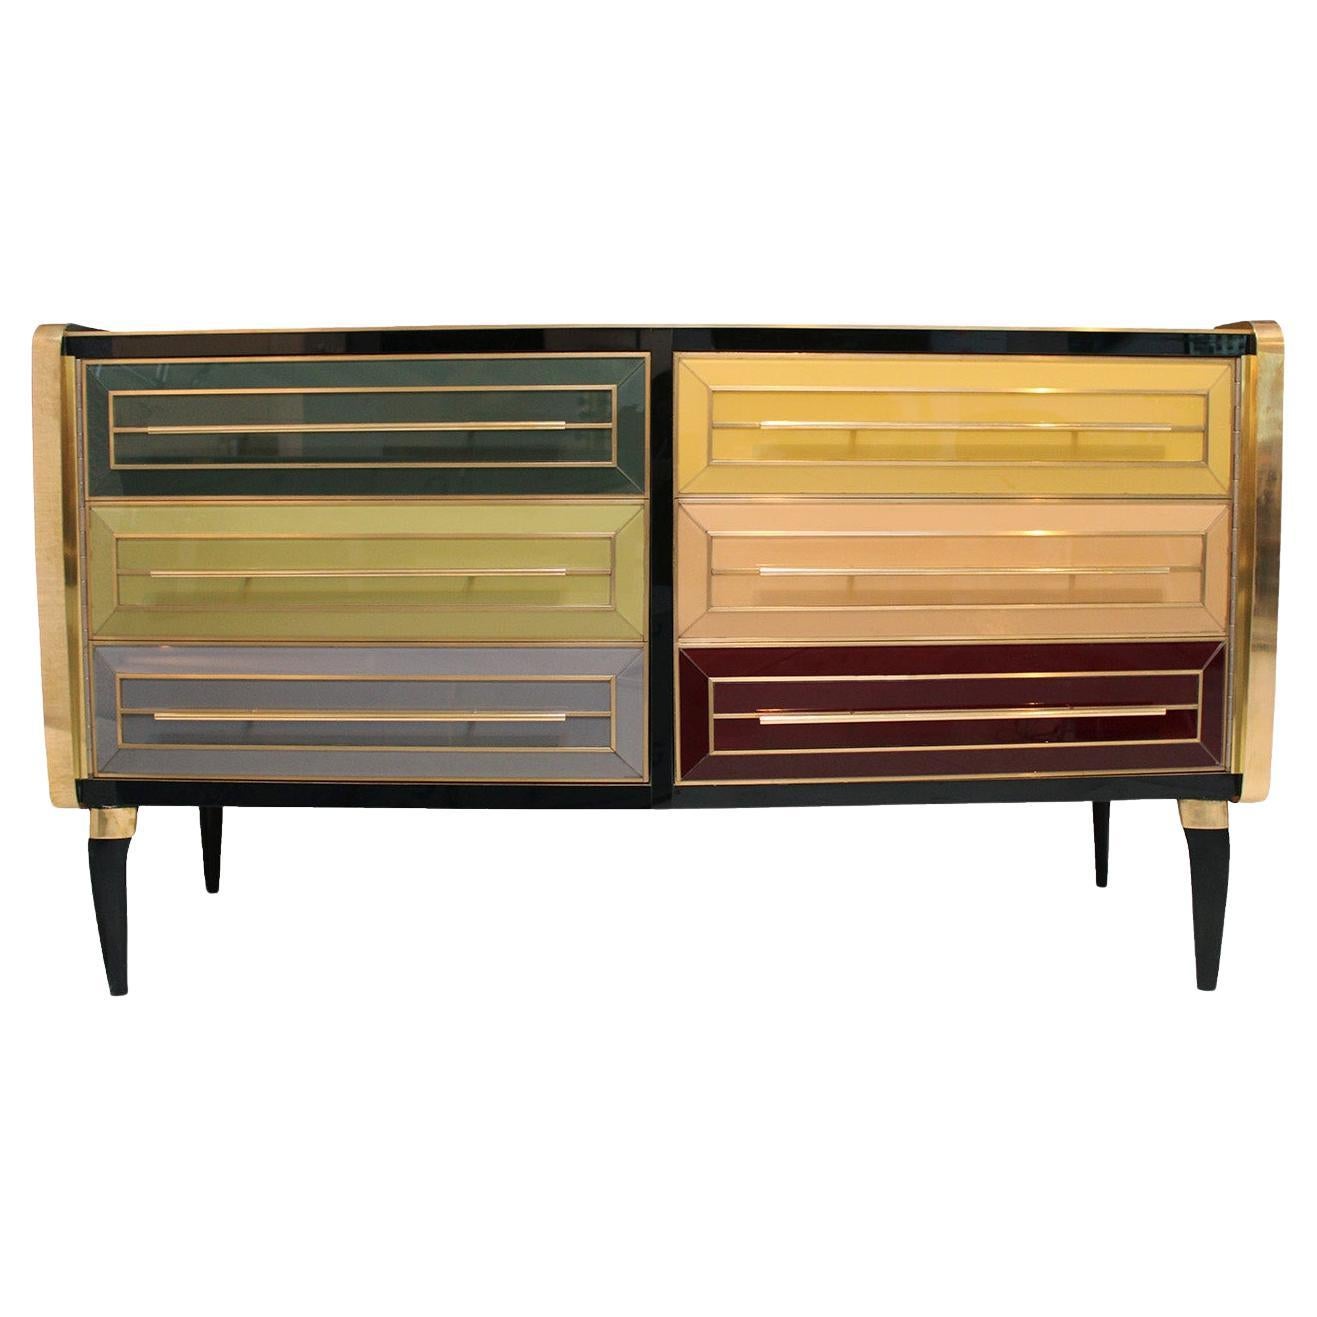 Solid Wood And Colored Glass Bar Furniture, Italy 1950's For Sale